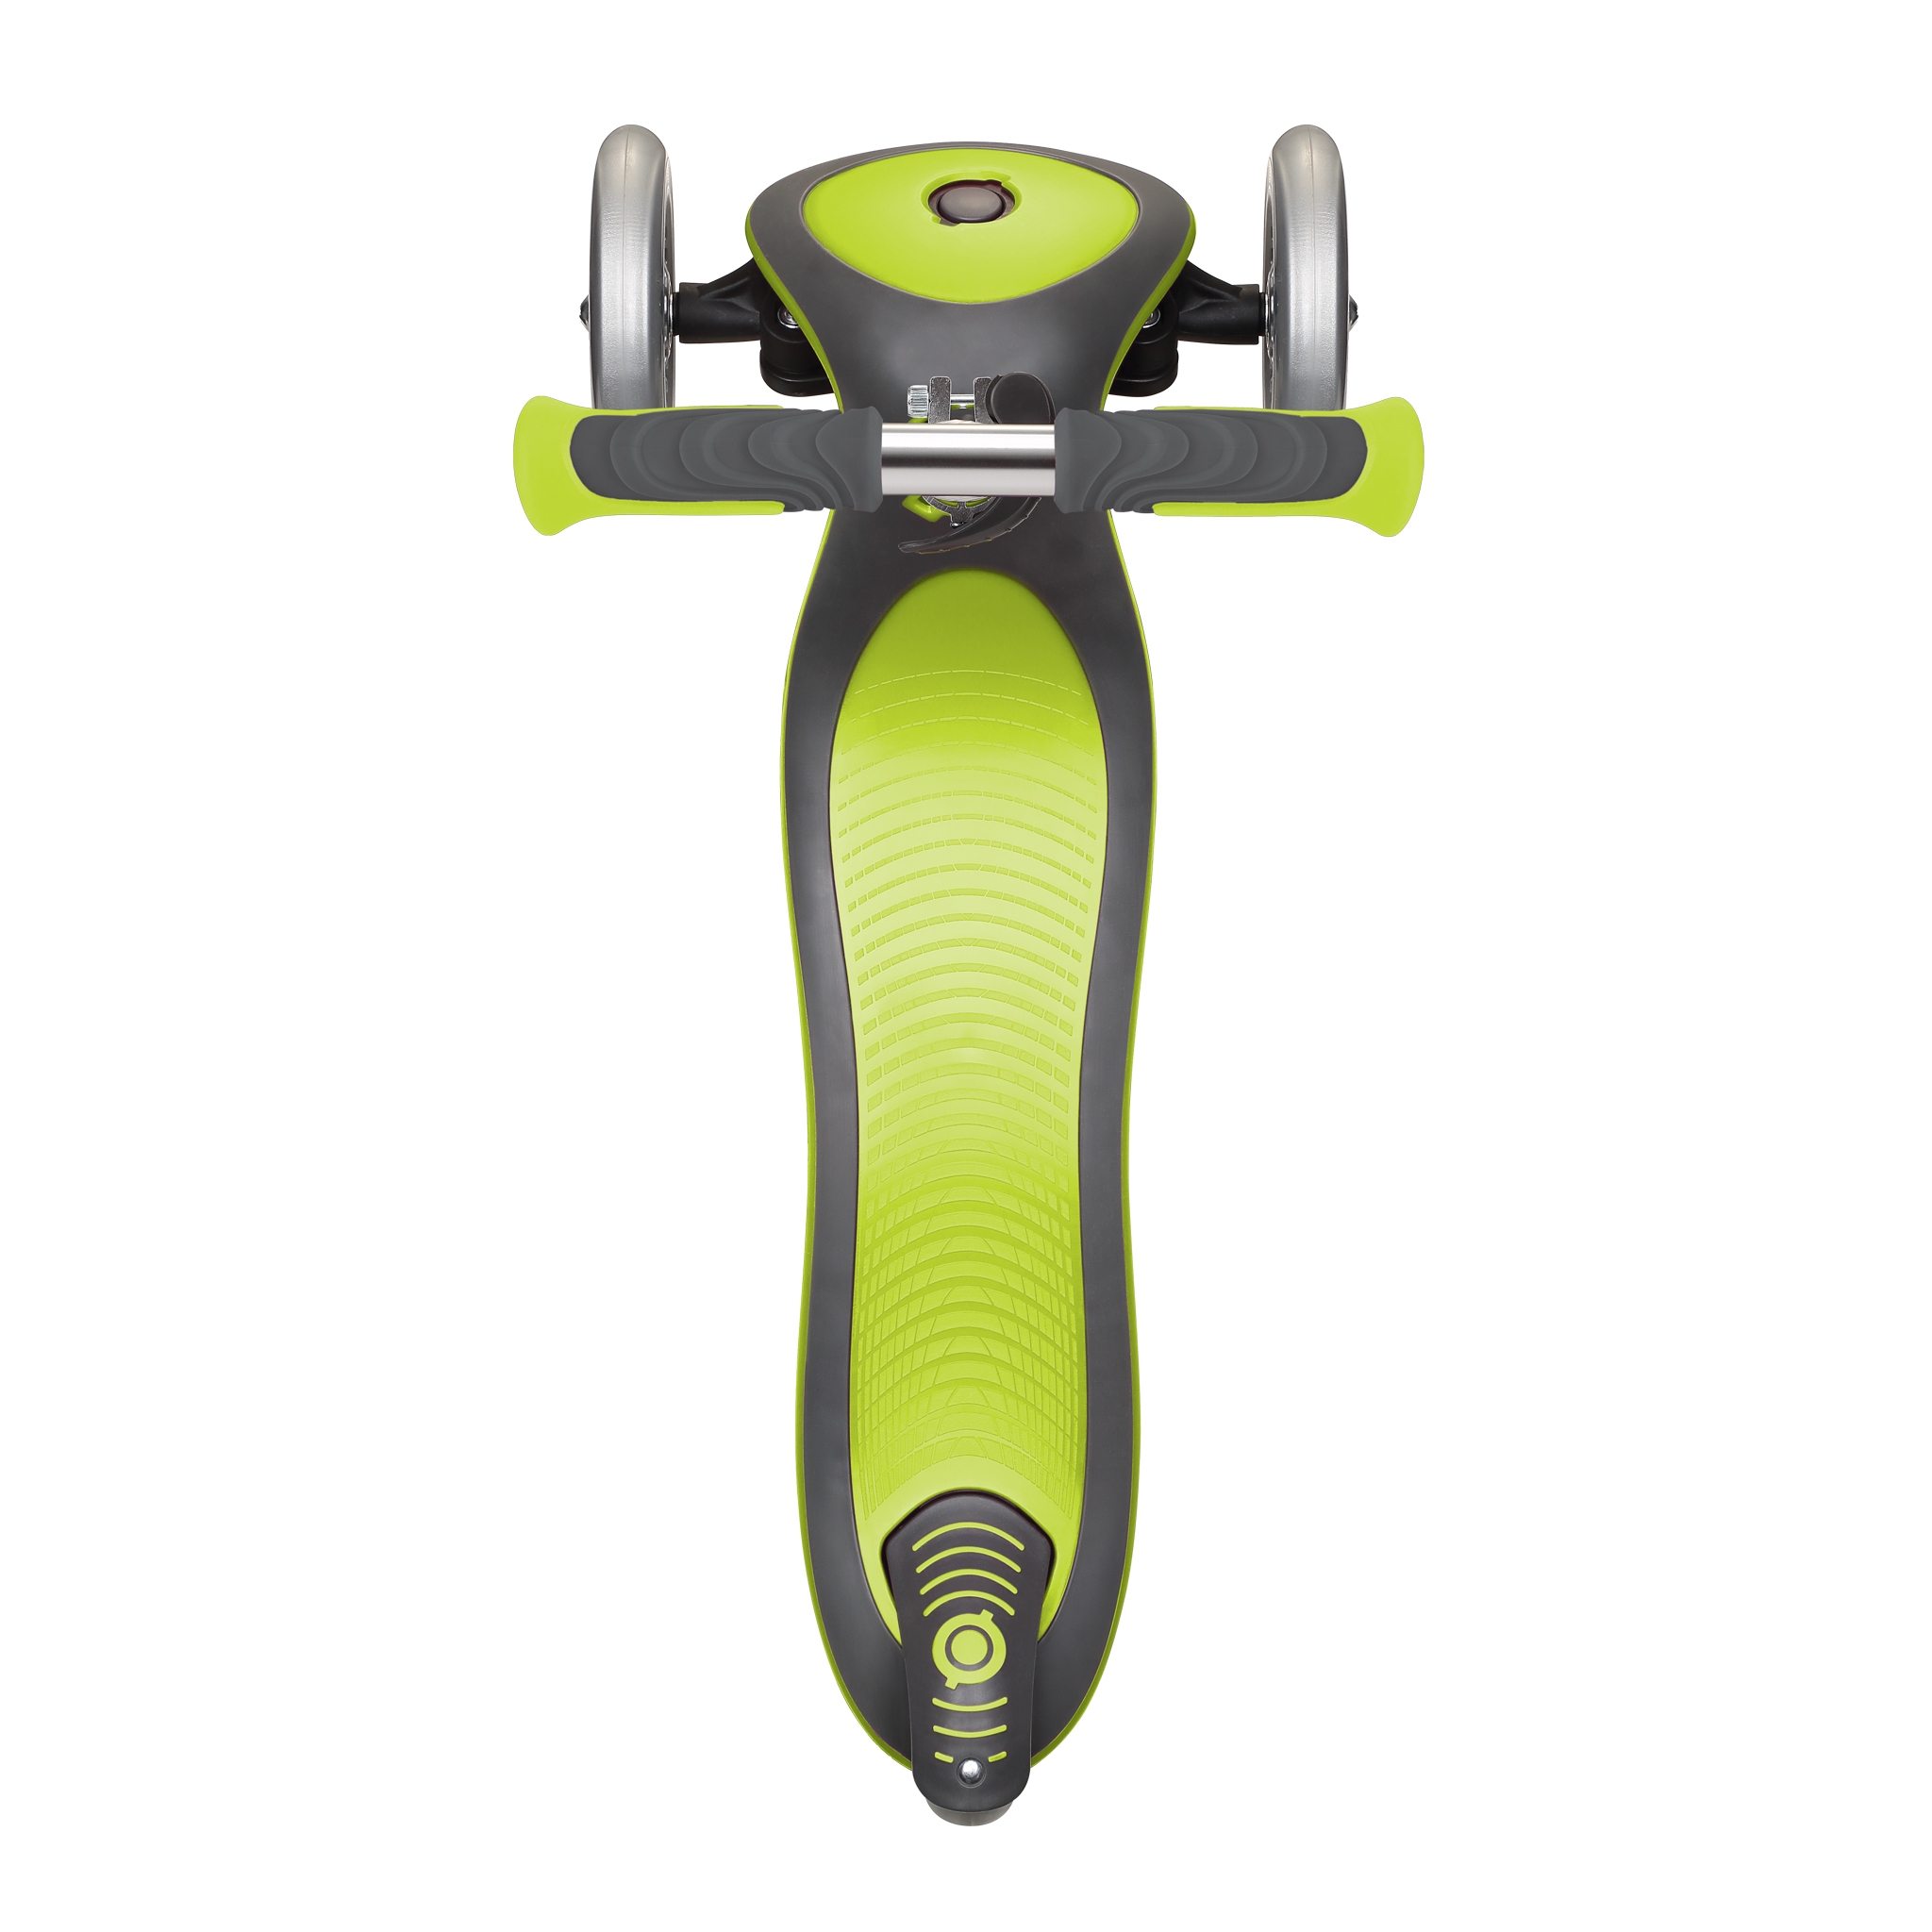 Globber-ELITE-DELUXE-3-wheel-foldable-scooter-for-kids-with-extra-wide-scooter-deck-lime-green 4